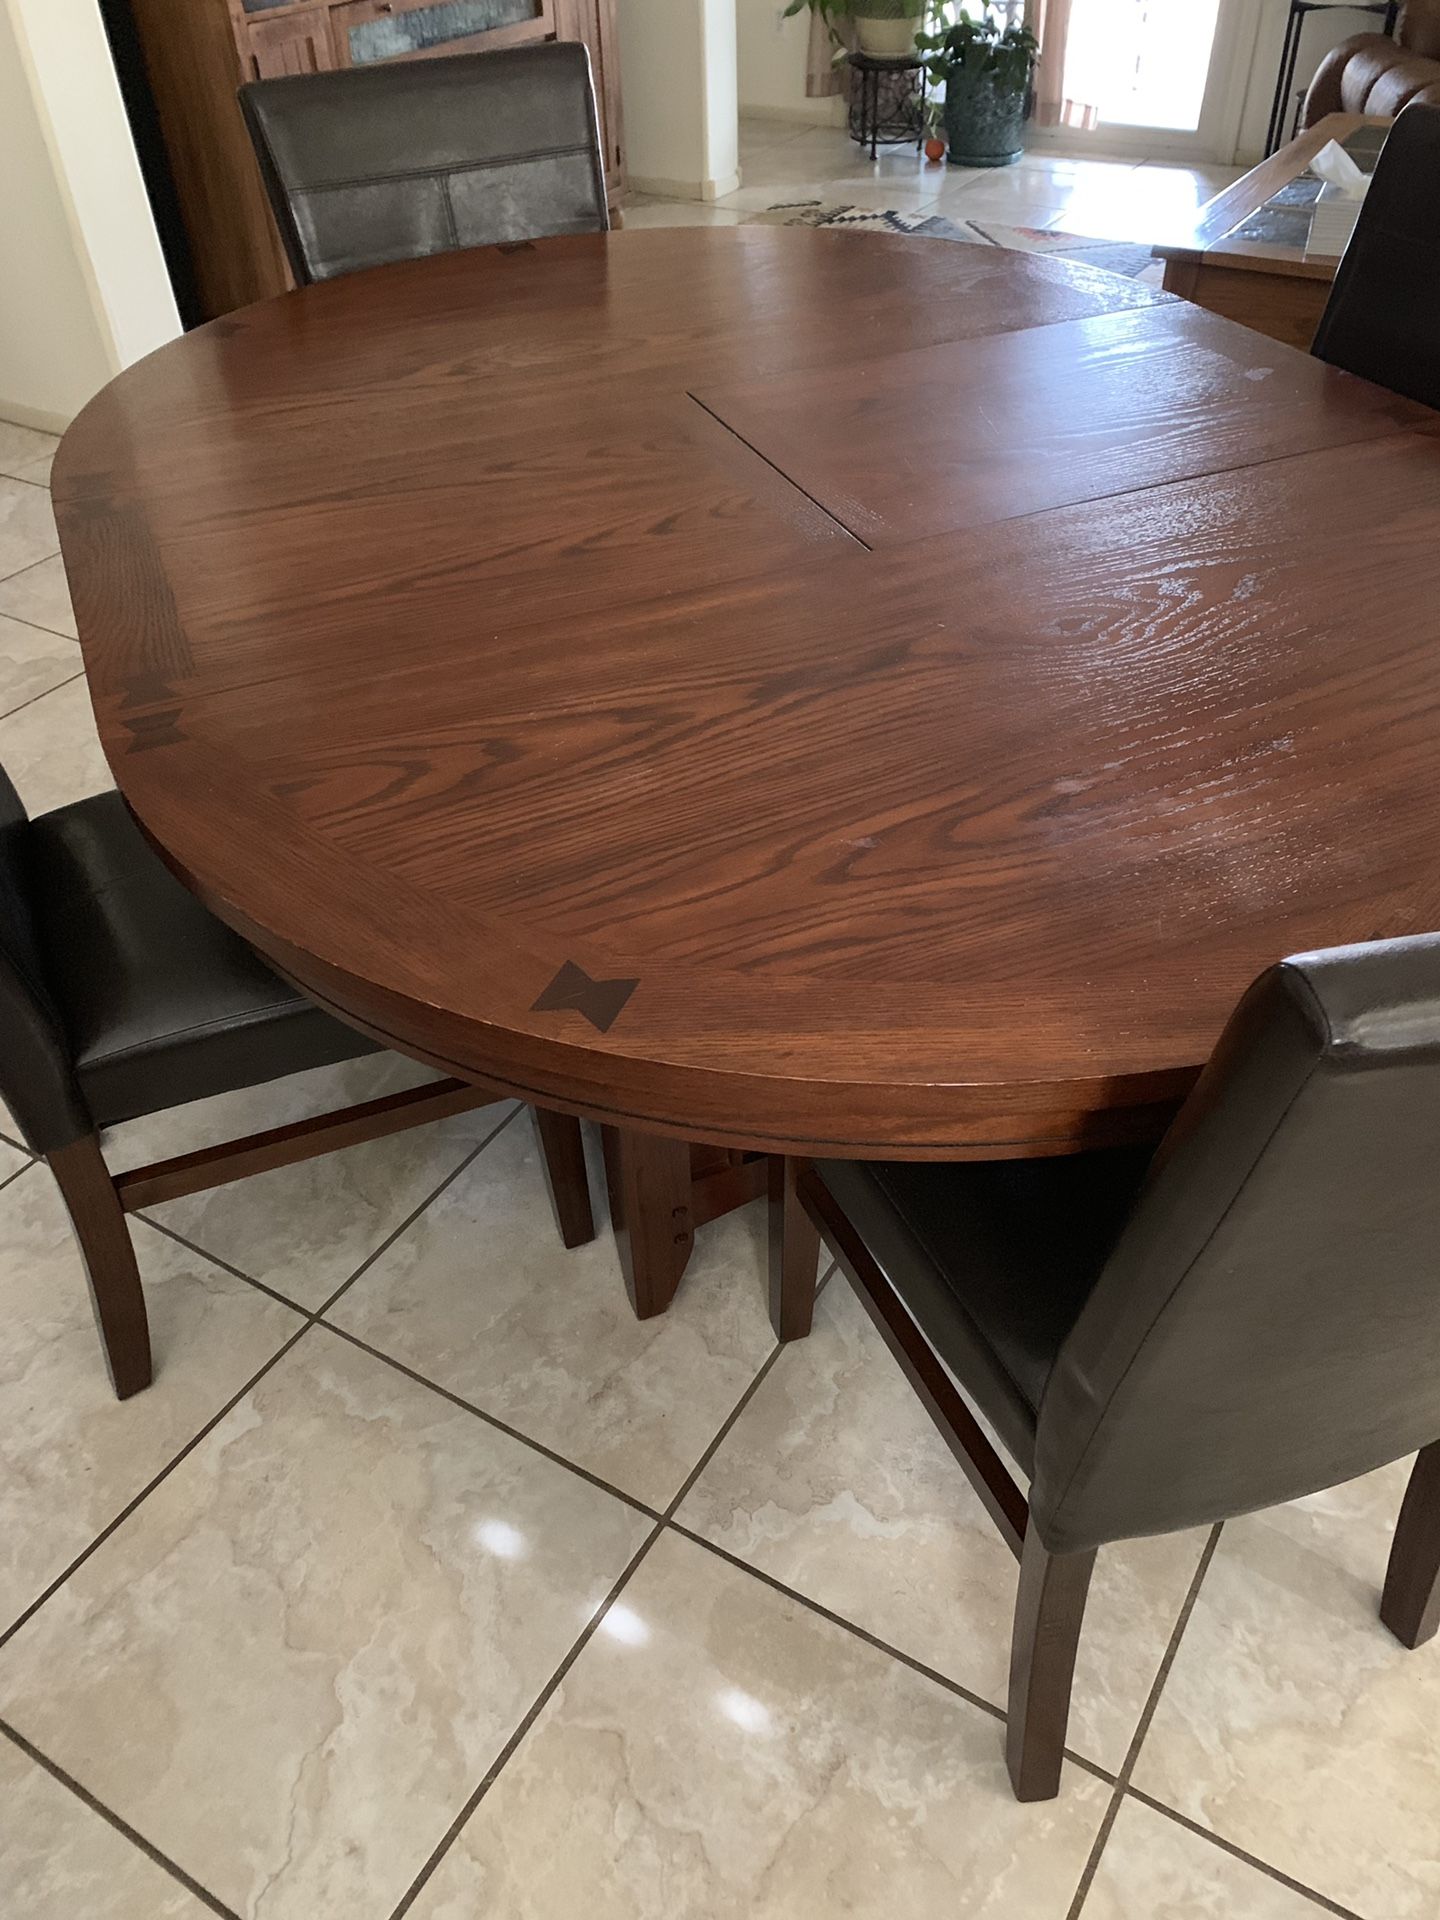 Solid wood dining table with chairs